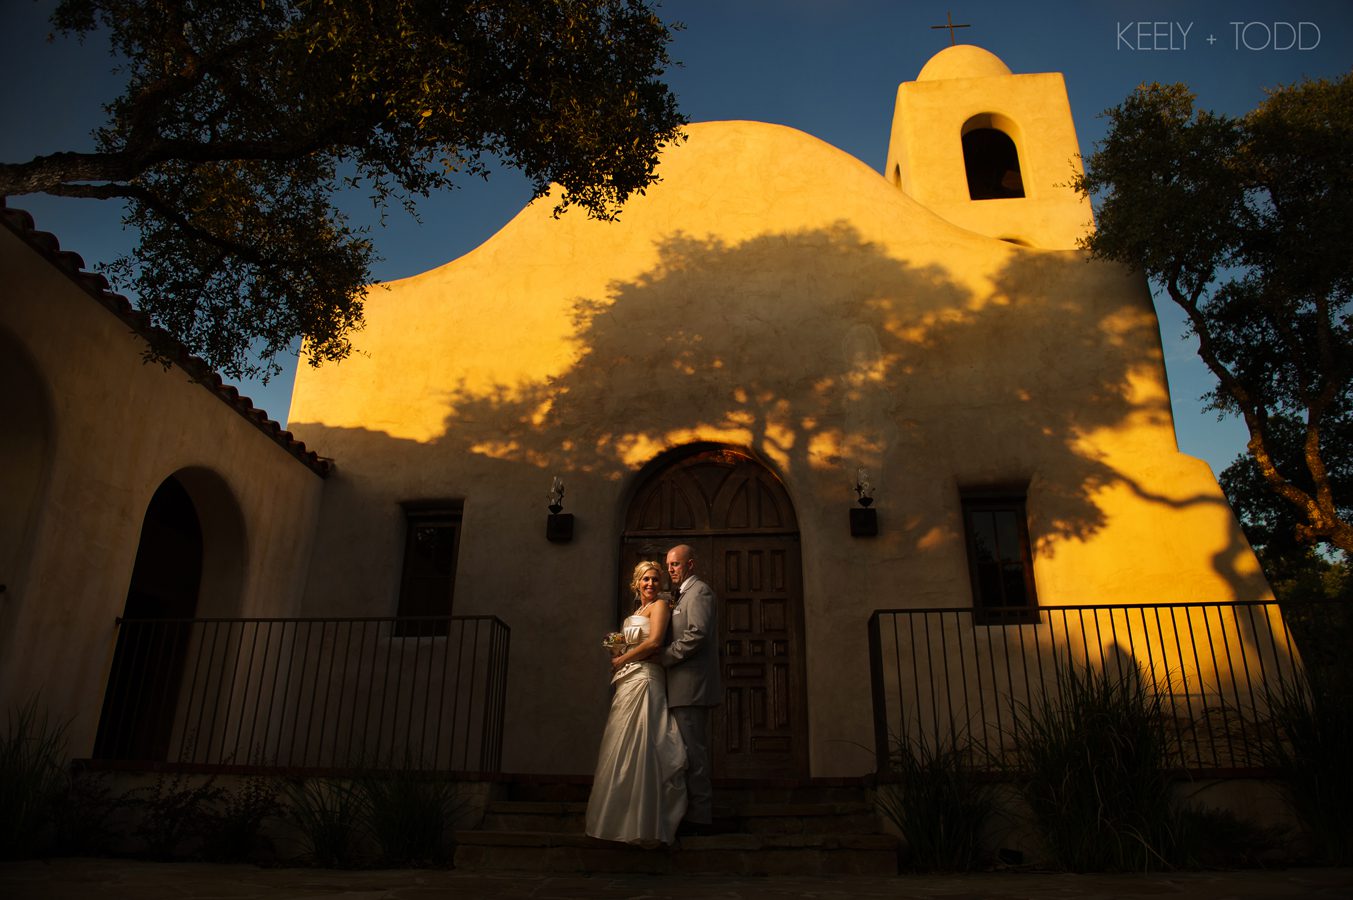 Lost Mission Wedding Photography - AJH Photography